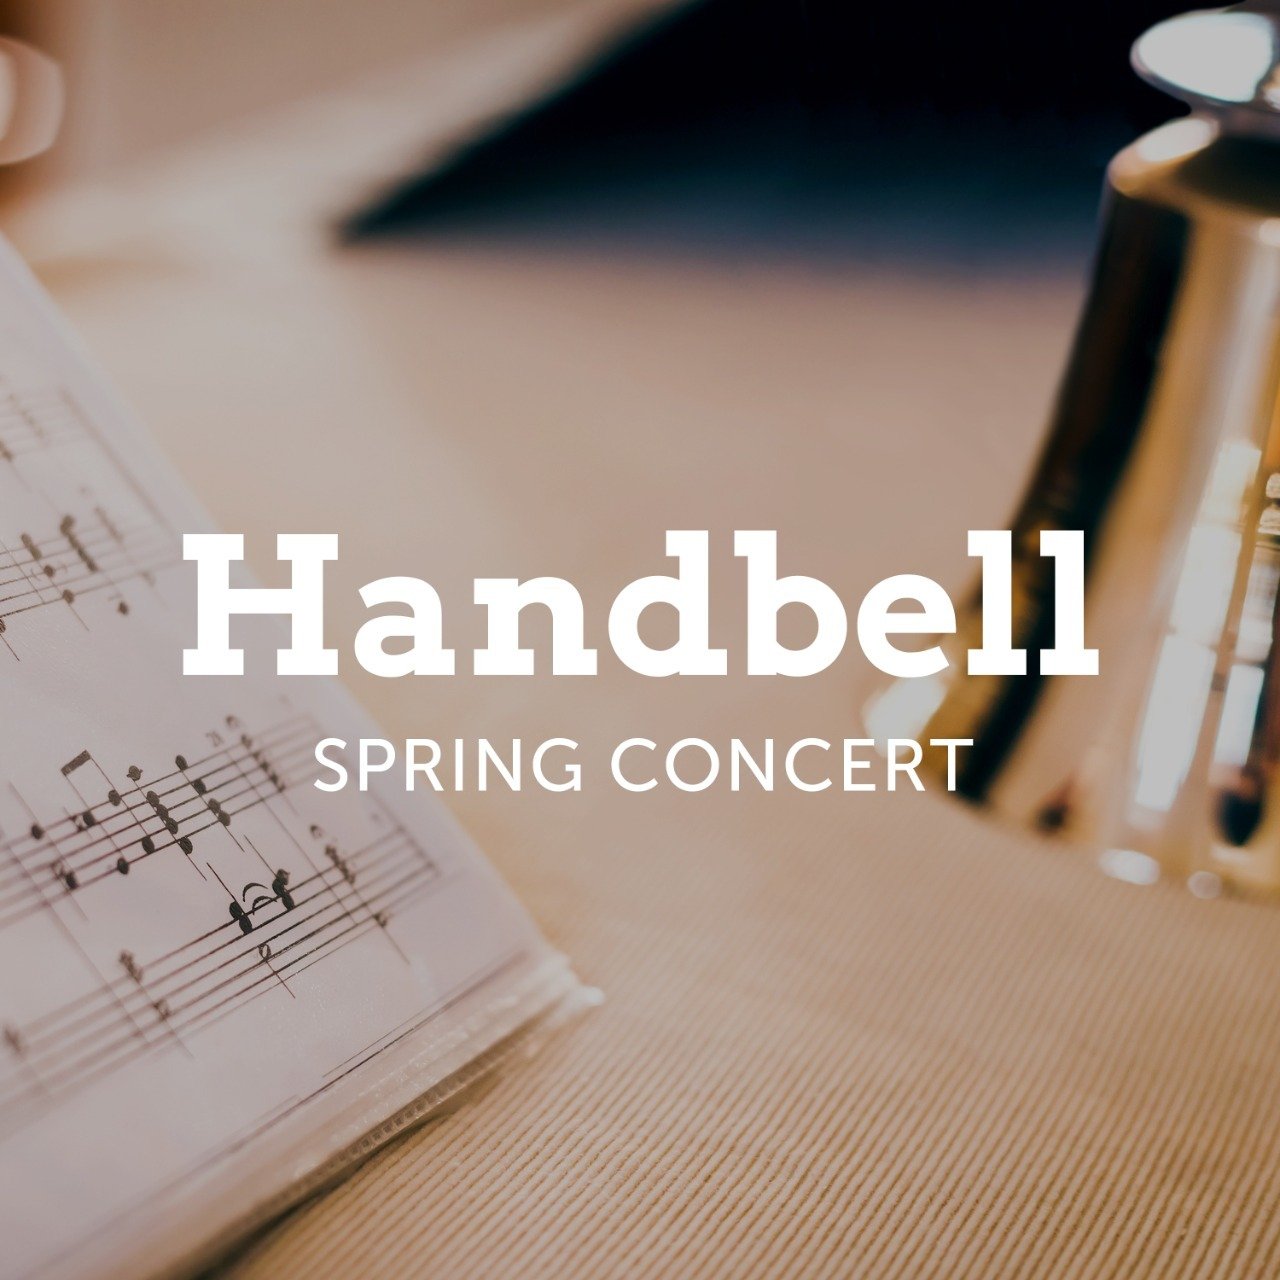 Spring is in full bloom and we're ready to celebrate! 🌸🎶 Join us at LLUC for Vespers on May 11 at 5 pm in the sanctuary for a special spring concert featuring our talented Handbell ensemble. 🎵 Let the beautiful melodies transport you to a place of